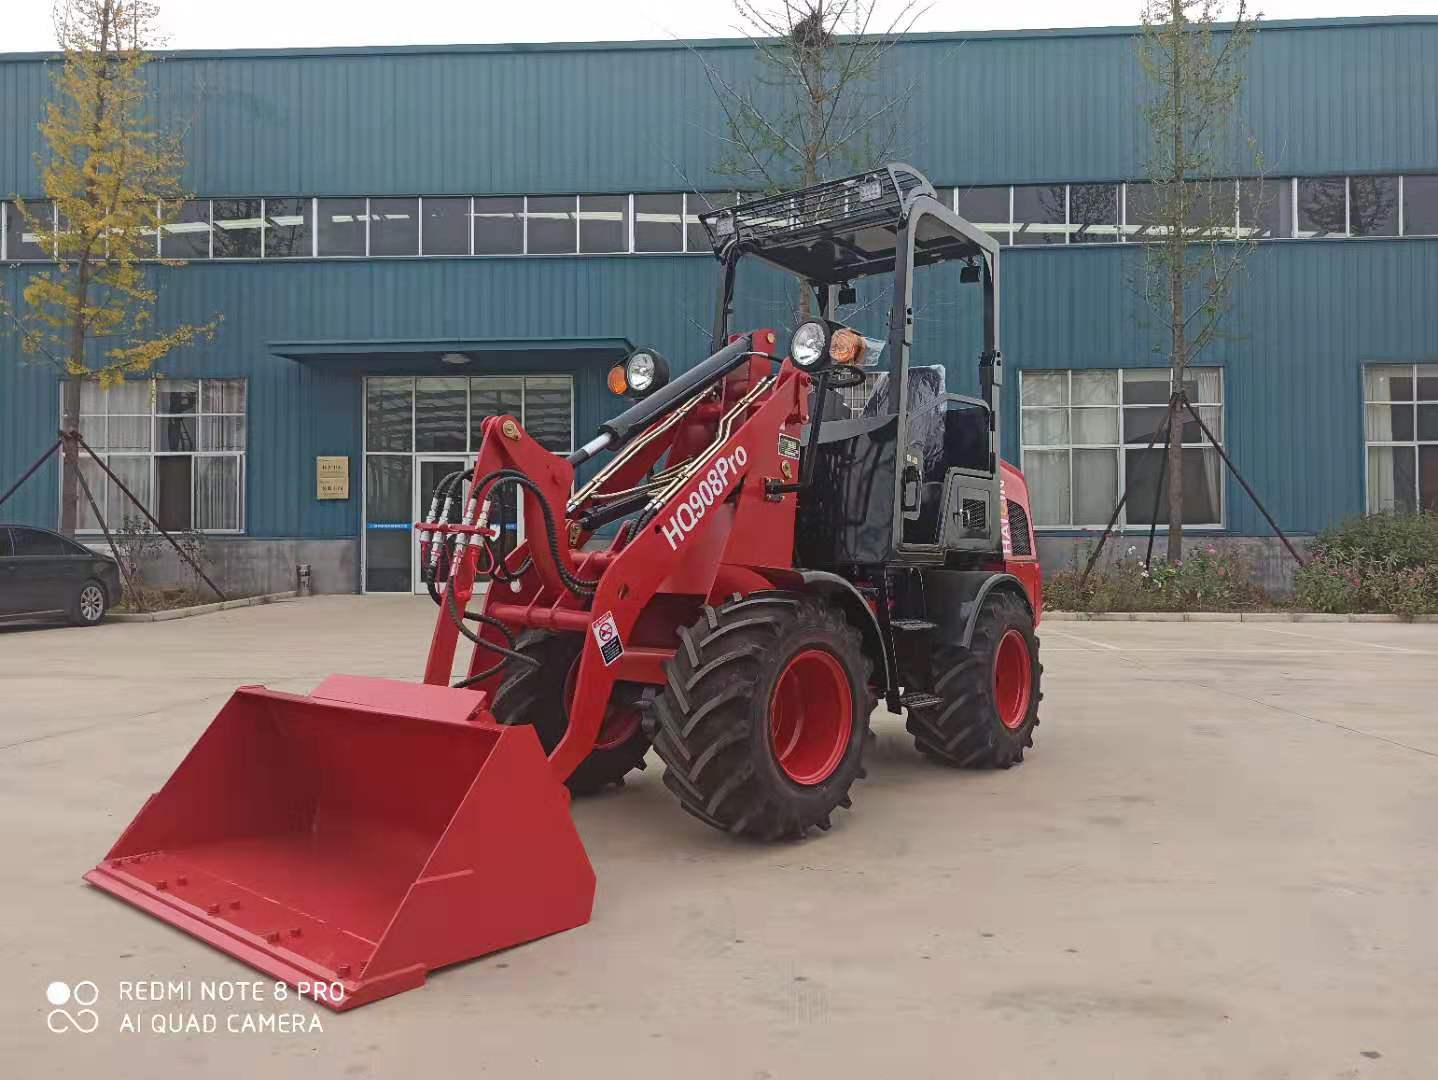 Haiqin Brand Small front loader HQ908Pro with Yanmar engine to Europe